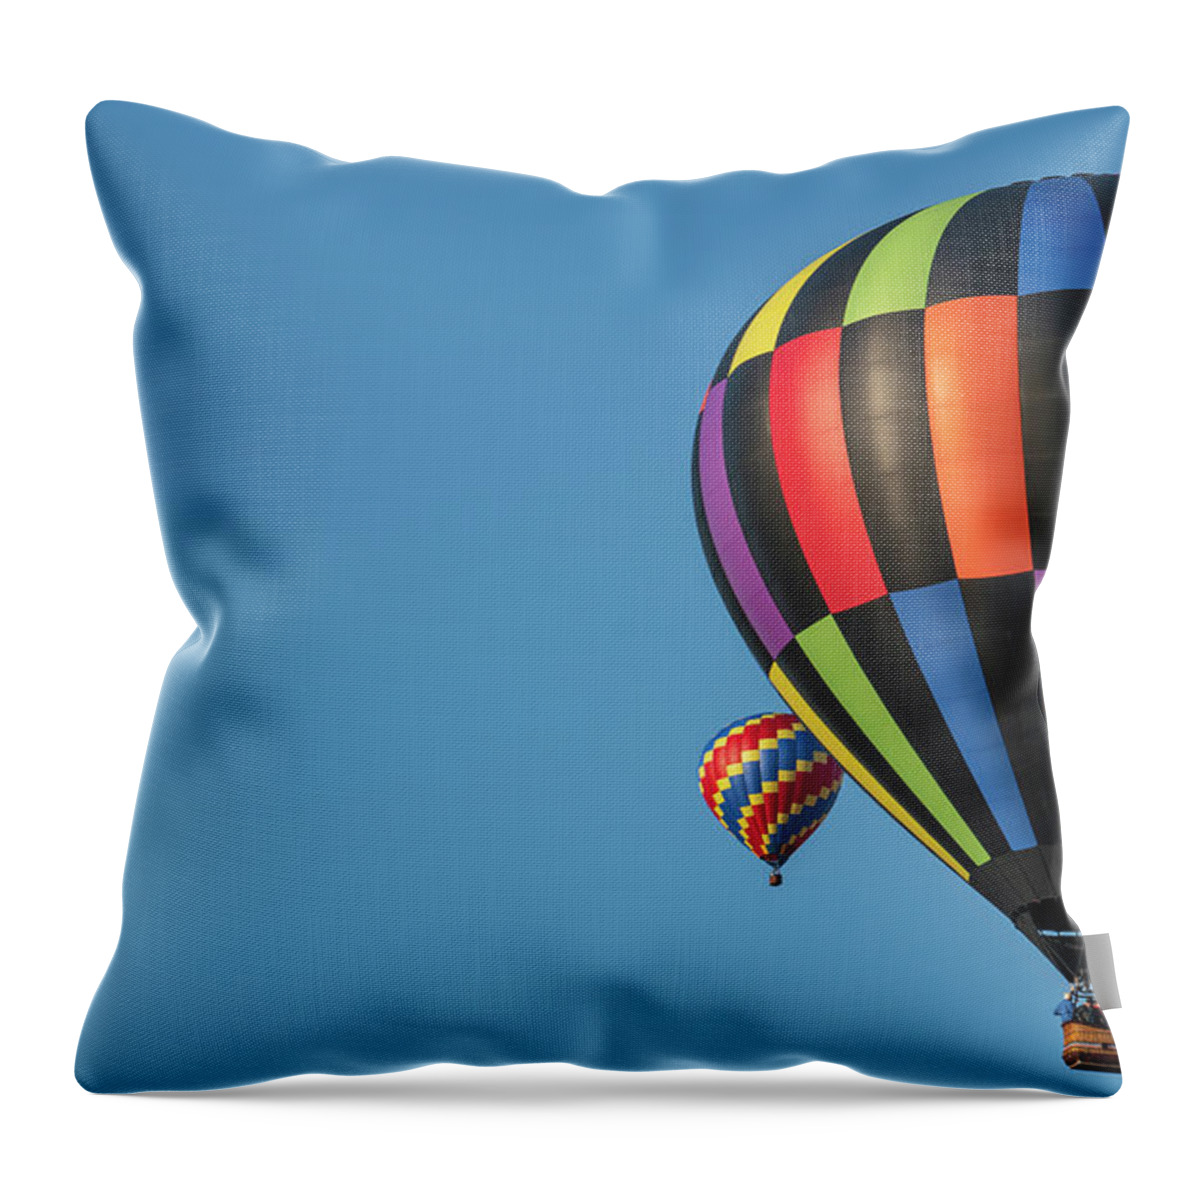 Balloon Throw Pillow featuring the digital art Into the Blue by Todd Tucker